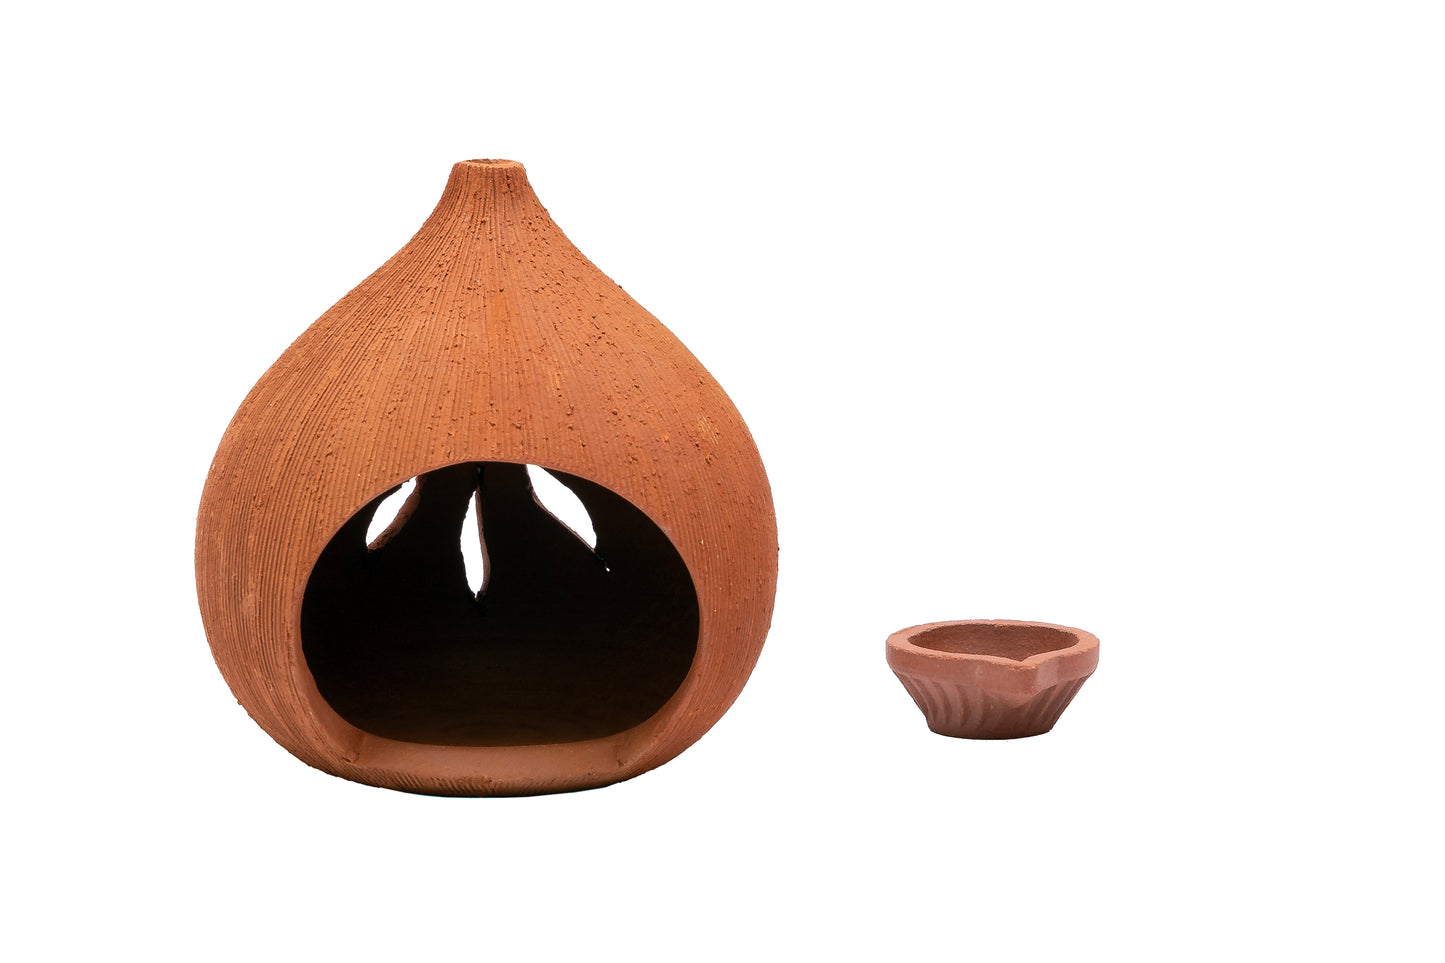 Terracotta Coconut Shape lamp Holder with lamp, Height - 5 inch